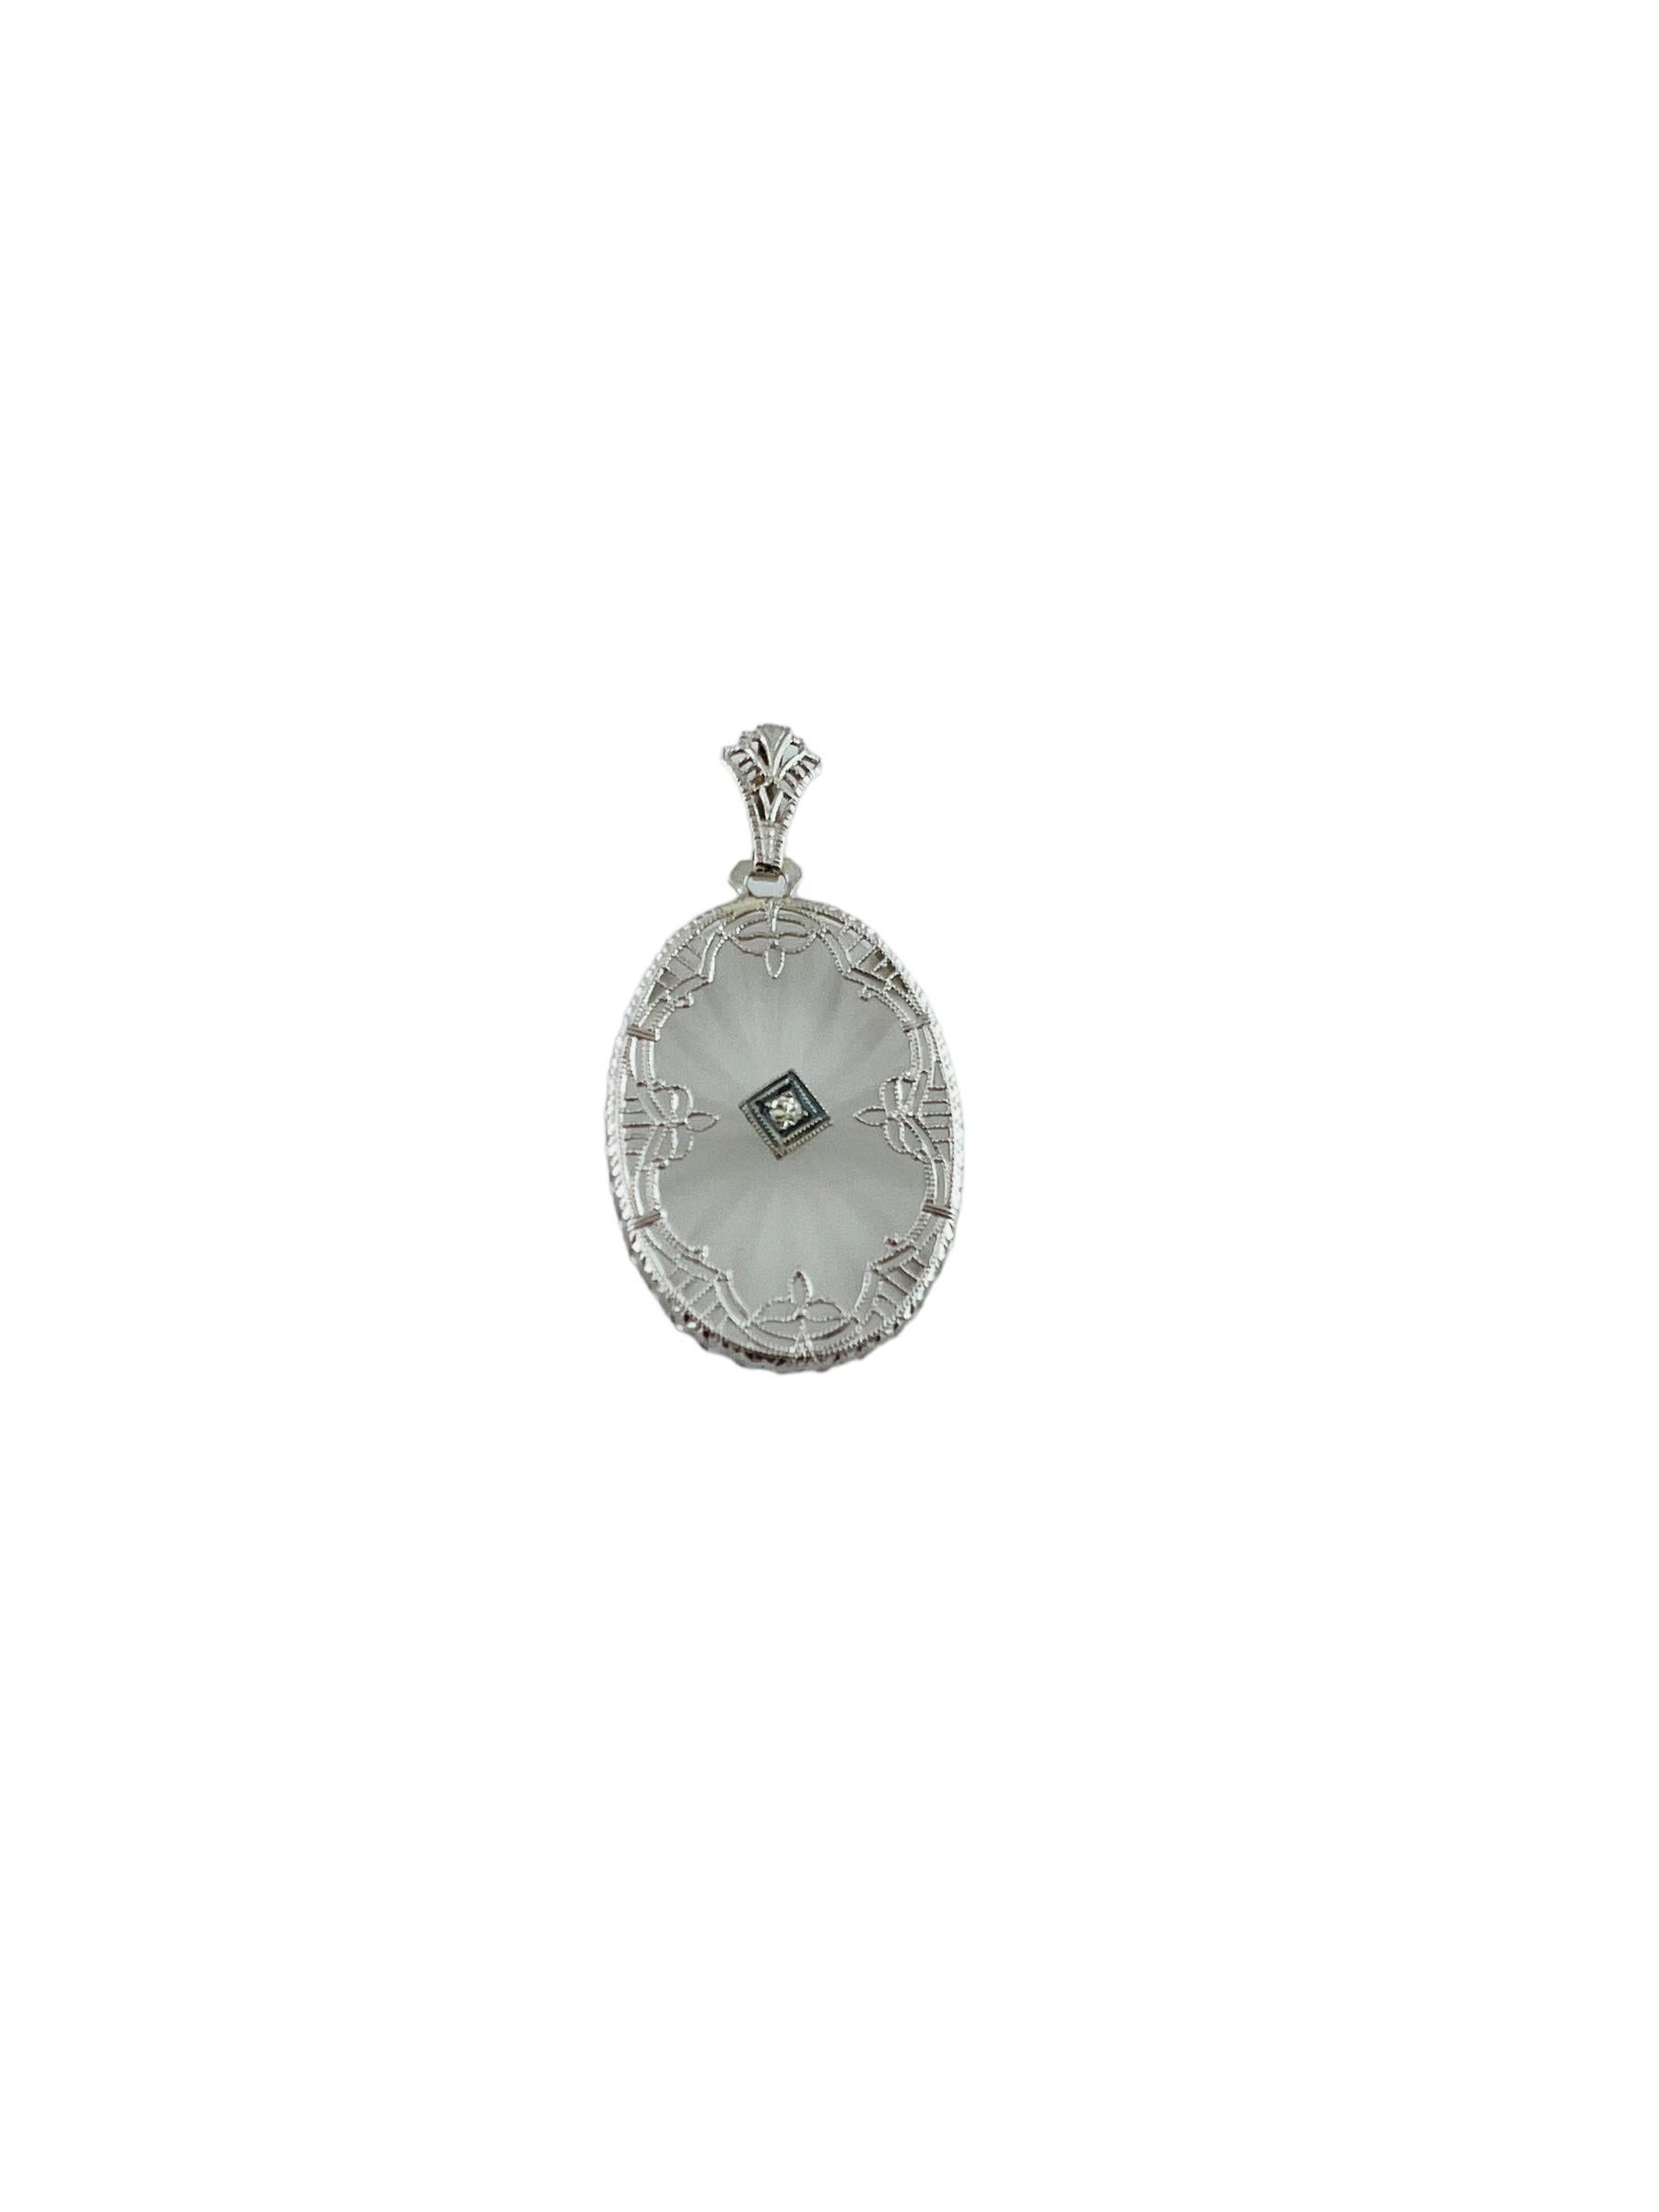 This beautiful oval pendant features camphor glass accented in a scrolling white gold frame.

Center of the pendant is decorated with a single cut diamond framed in white carat gold

The diamond weighs approx. .03 cts and is of SI1 clarity and K